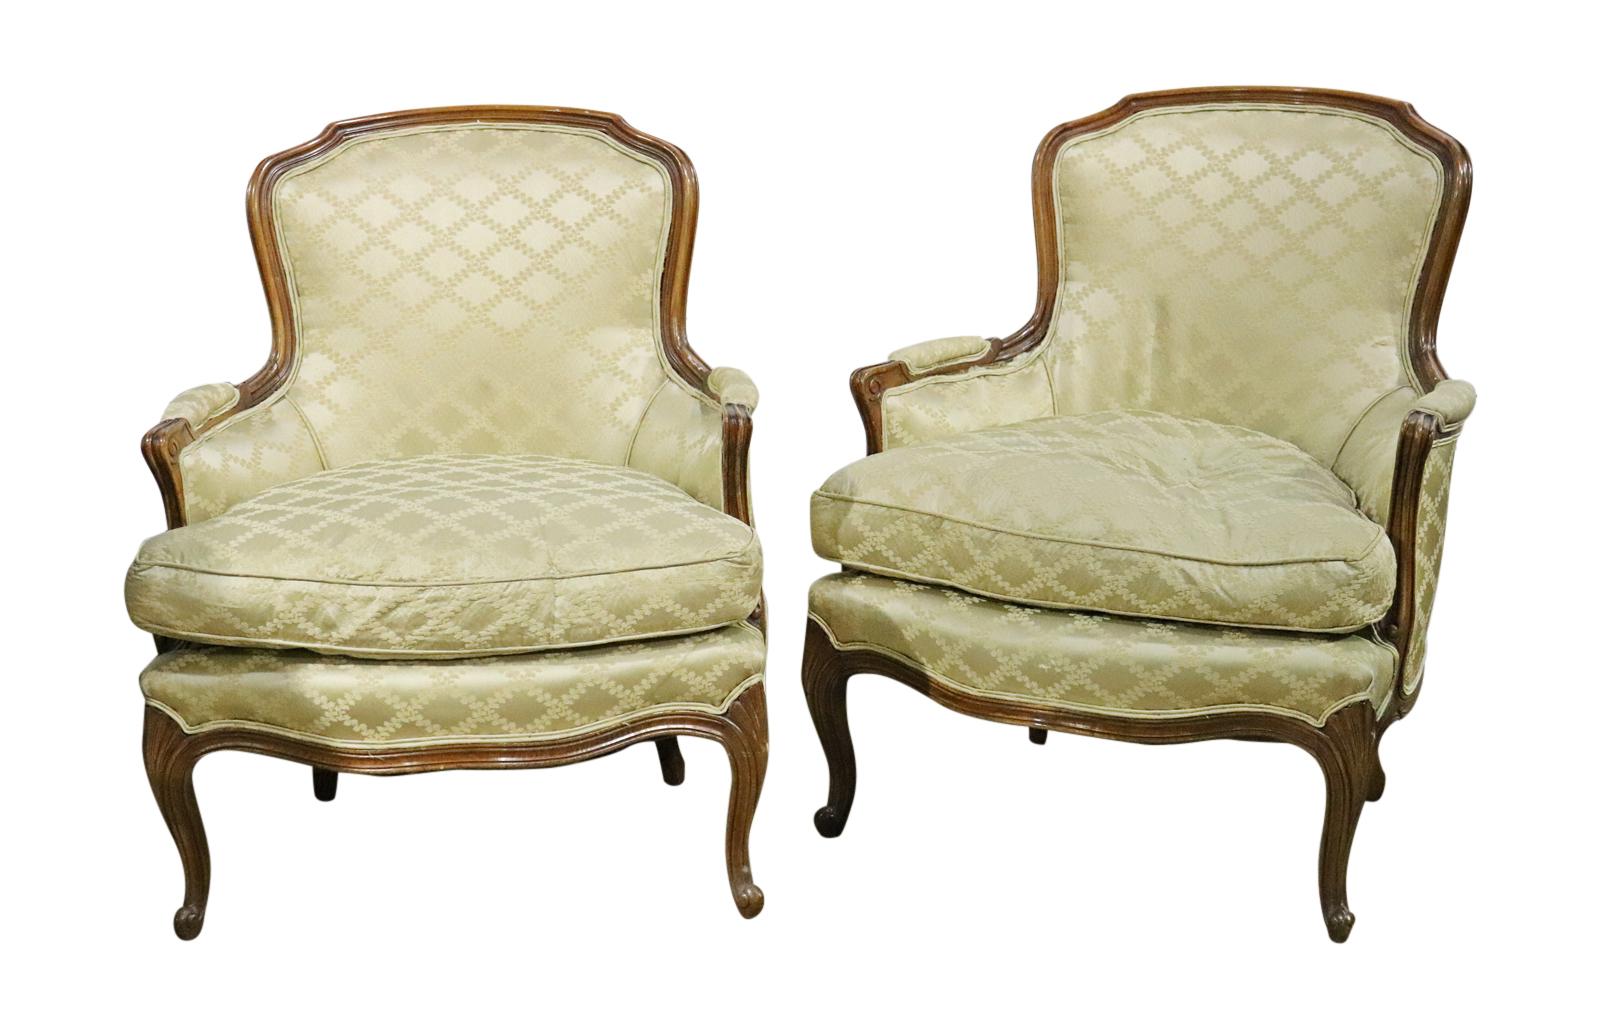 Louis XV style. Upholstered. Wood legs. 35